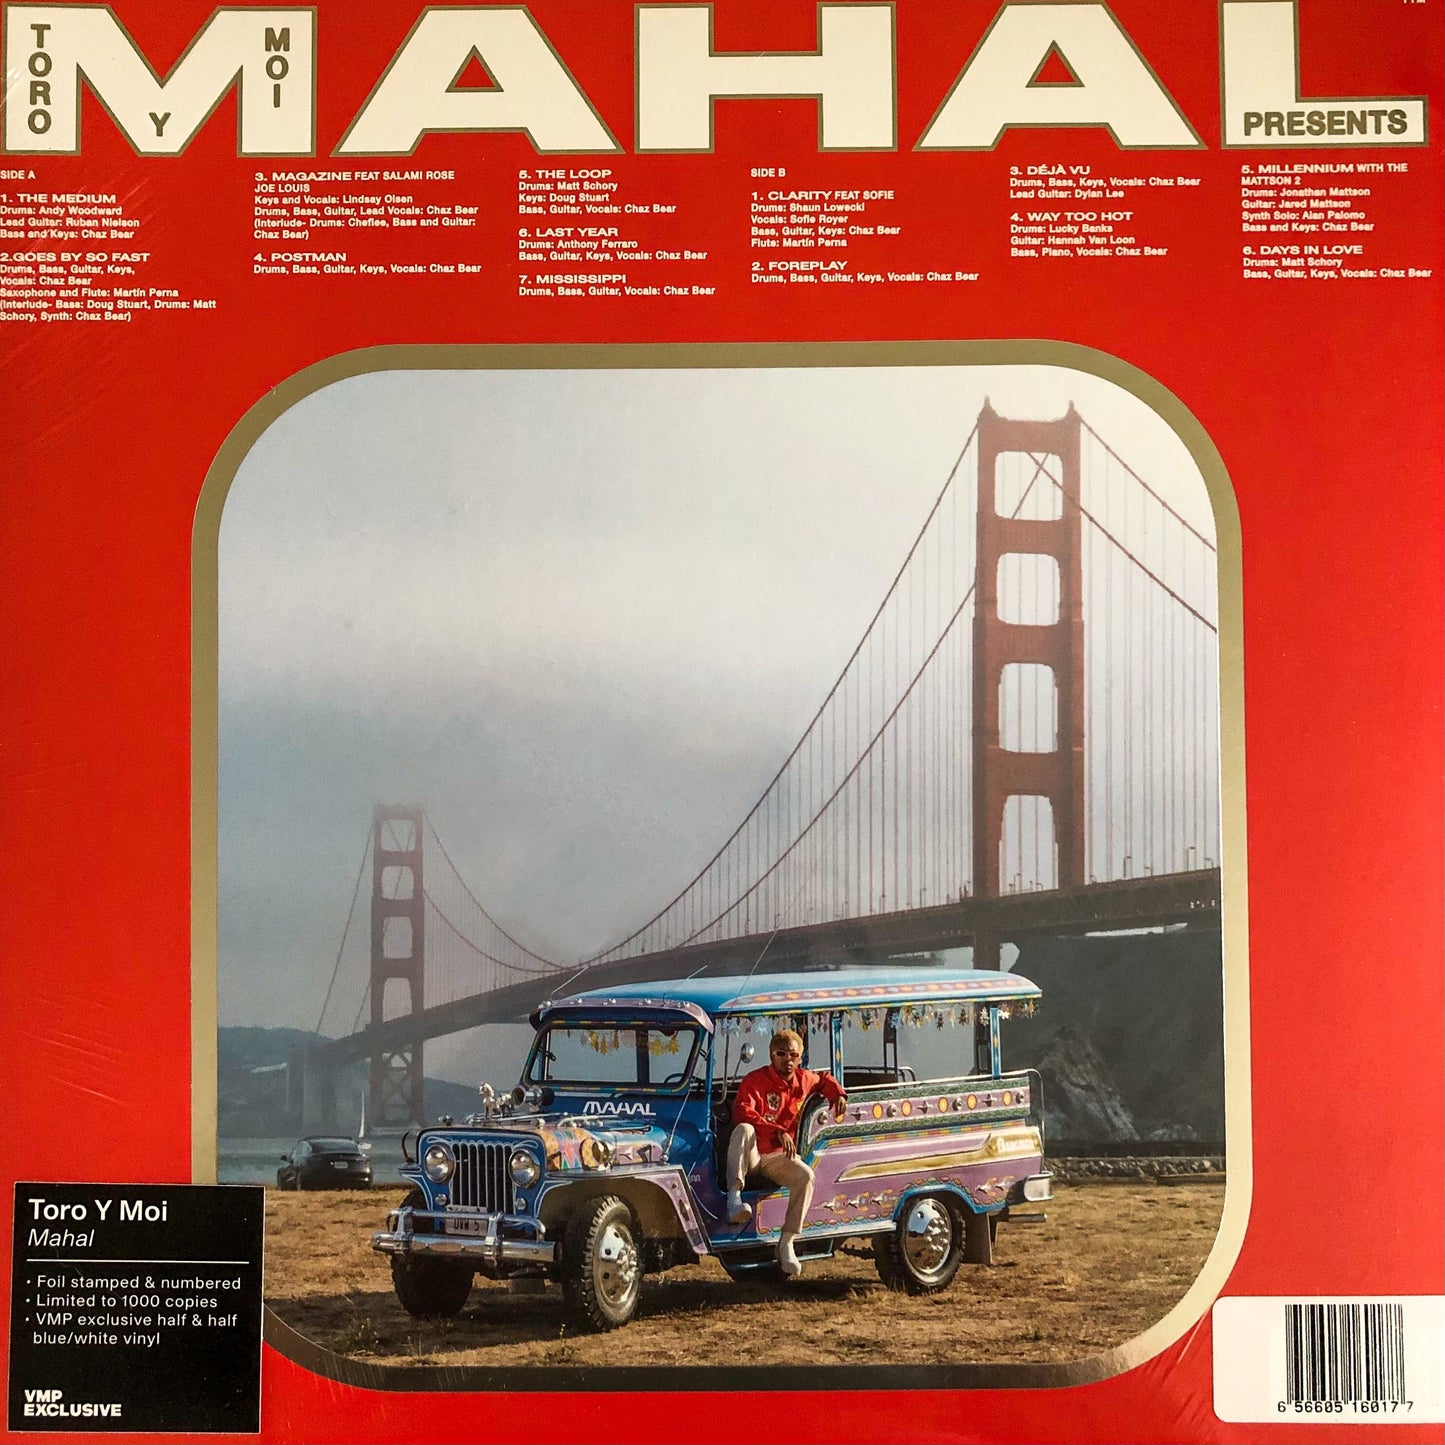 Mahal (Limited Edition VMP Exclusive 'Blue Jay' Vinyl)